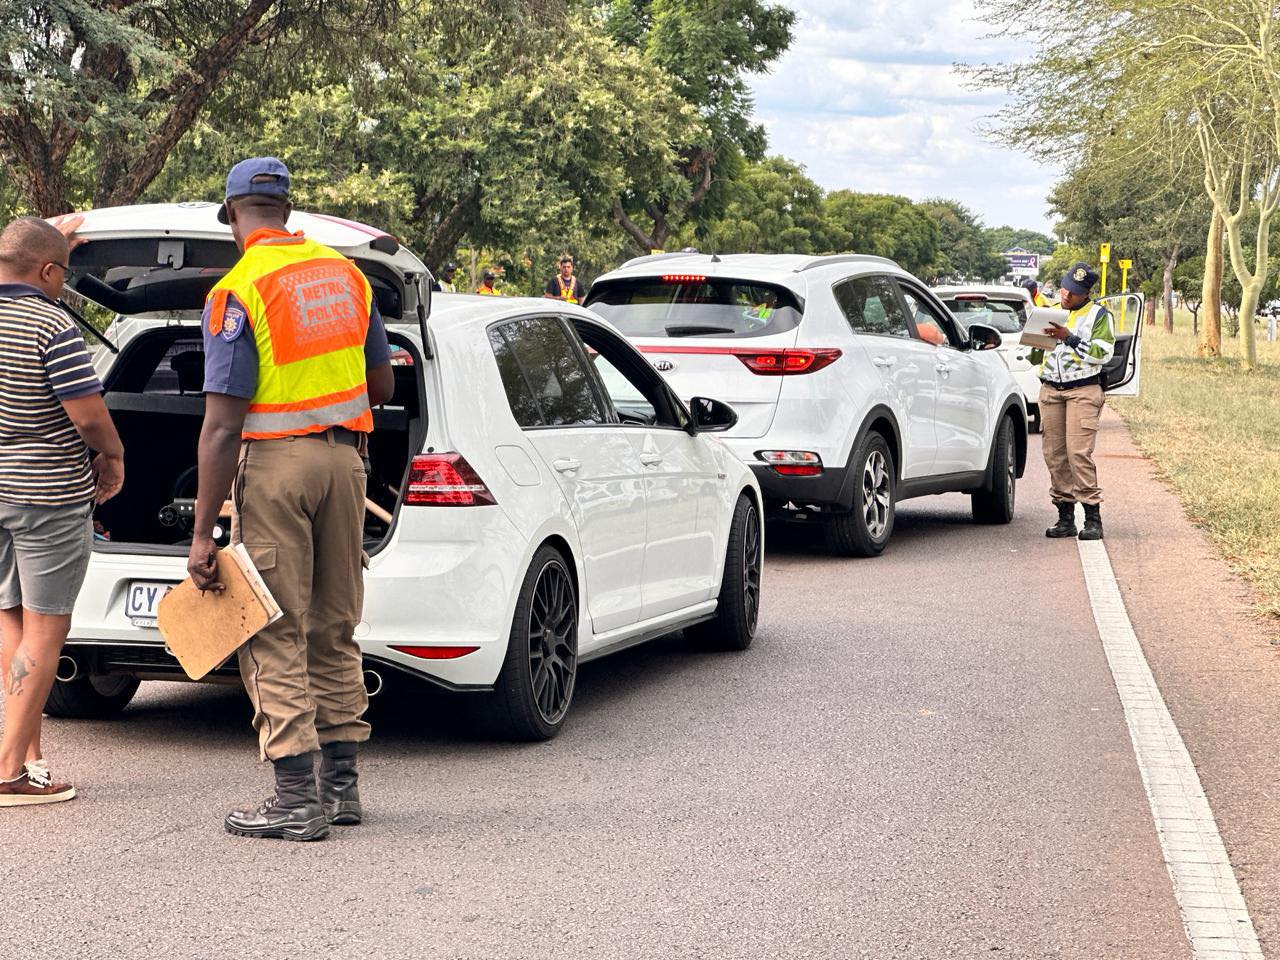 Tshwane Metro Police Department conducted successful operations during the Easter long weekend